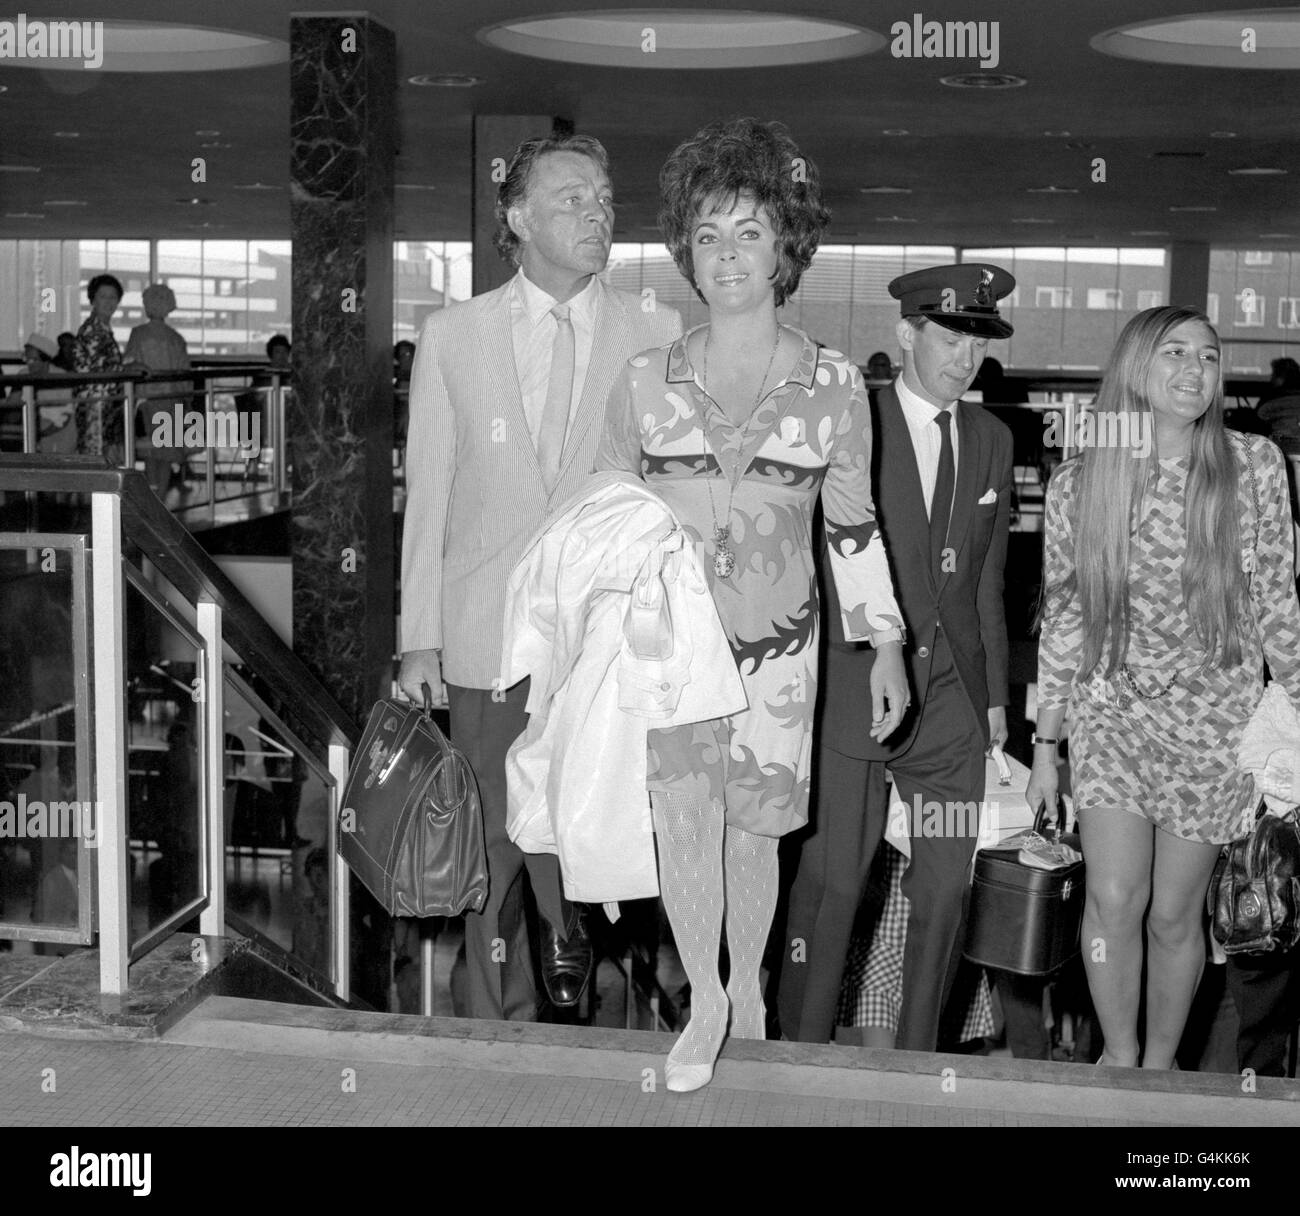 Welsh actor, Richard Burton and his actress wife, Elizabeth Taylor at London's Heathrow airport before departing for Sicily. Stock Photo